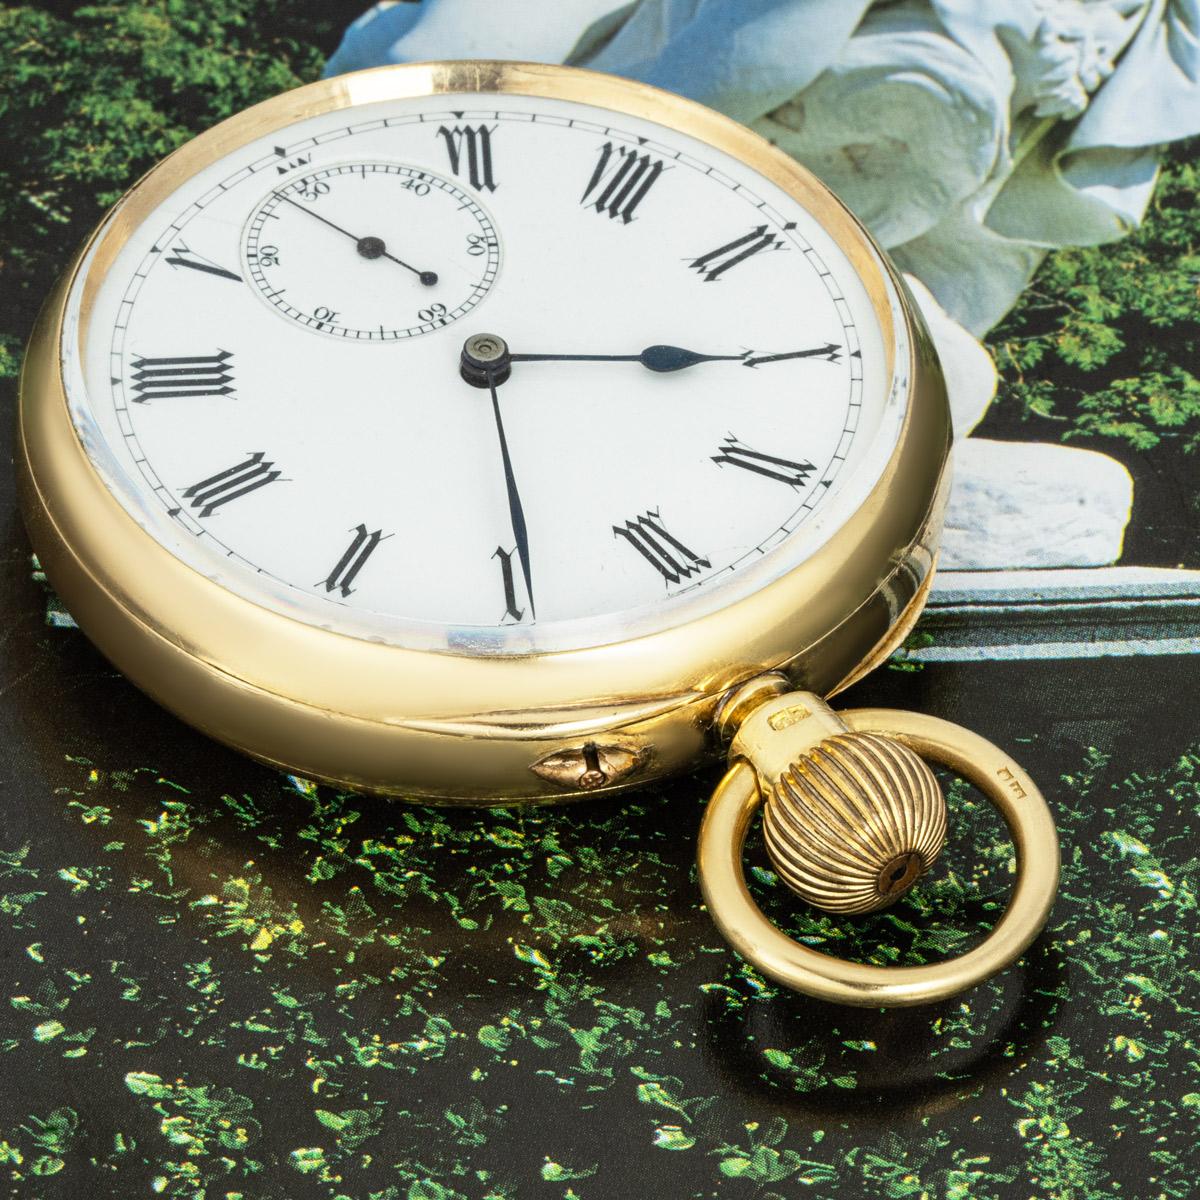 Newsome for Bonniksen. A Rare 18ct Yellow Gold Kew A Karrusel Keyless Lever Open Face Pocket Watch C1896.

Dial: The white enamel dial with unusual Gothic Roman numerals, outer minute track, subsidiary seconds dial at six o'clock and original blues